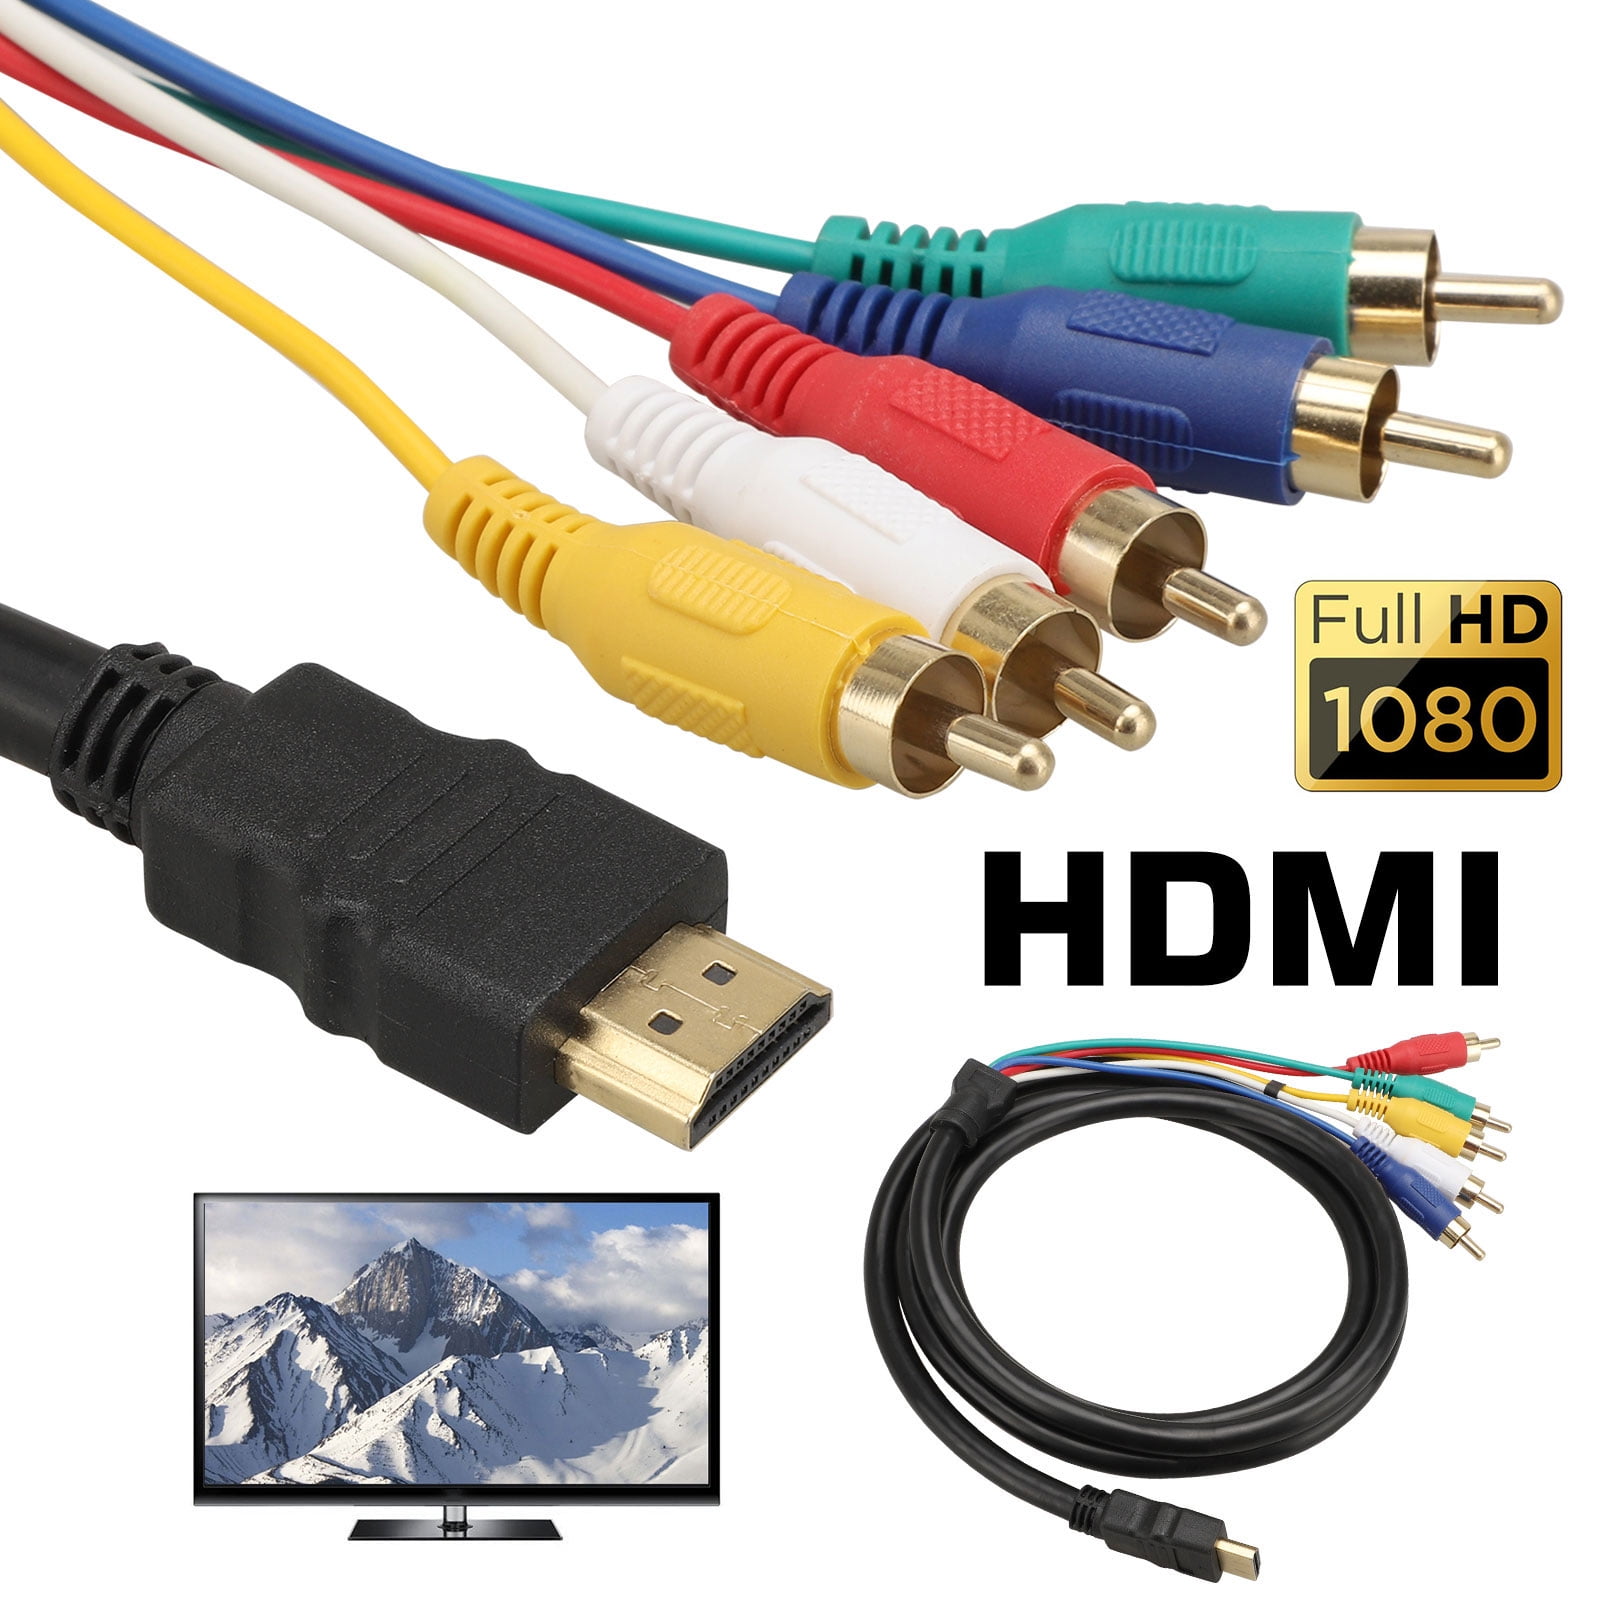 HDMI to RCA Cable, Chenduomi HDMI Male to 5RCA Video Audio AV Converter  Adapter Cable For HDTV DVD and most LCD Projectors (Color of the Cable May